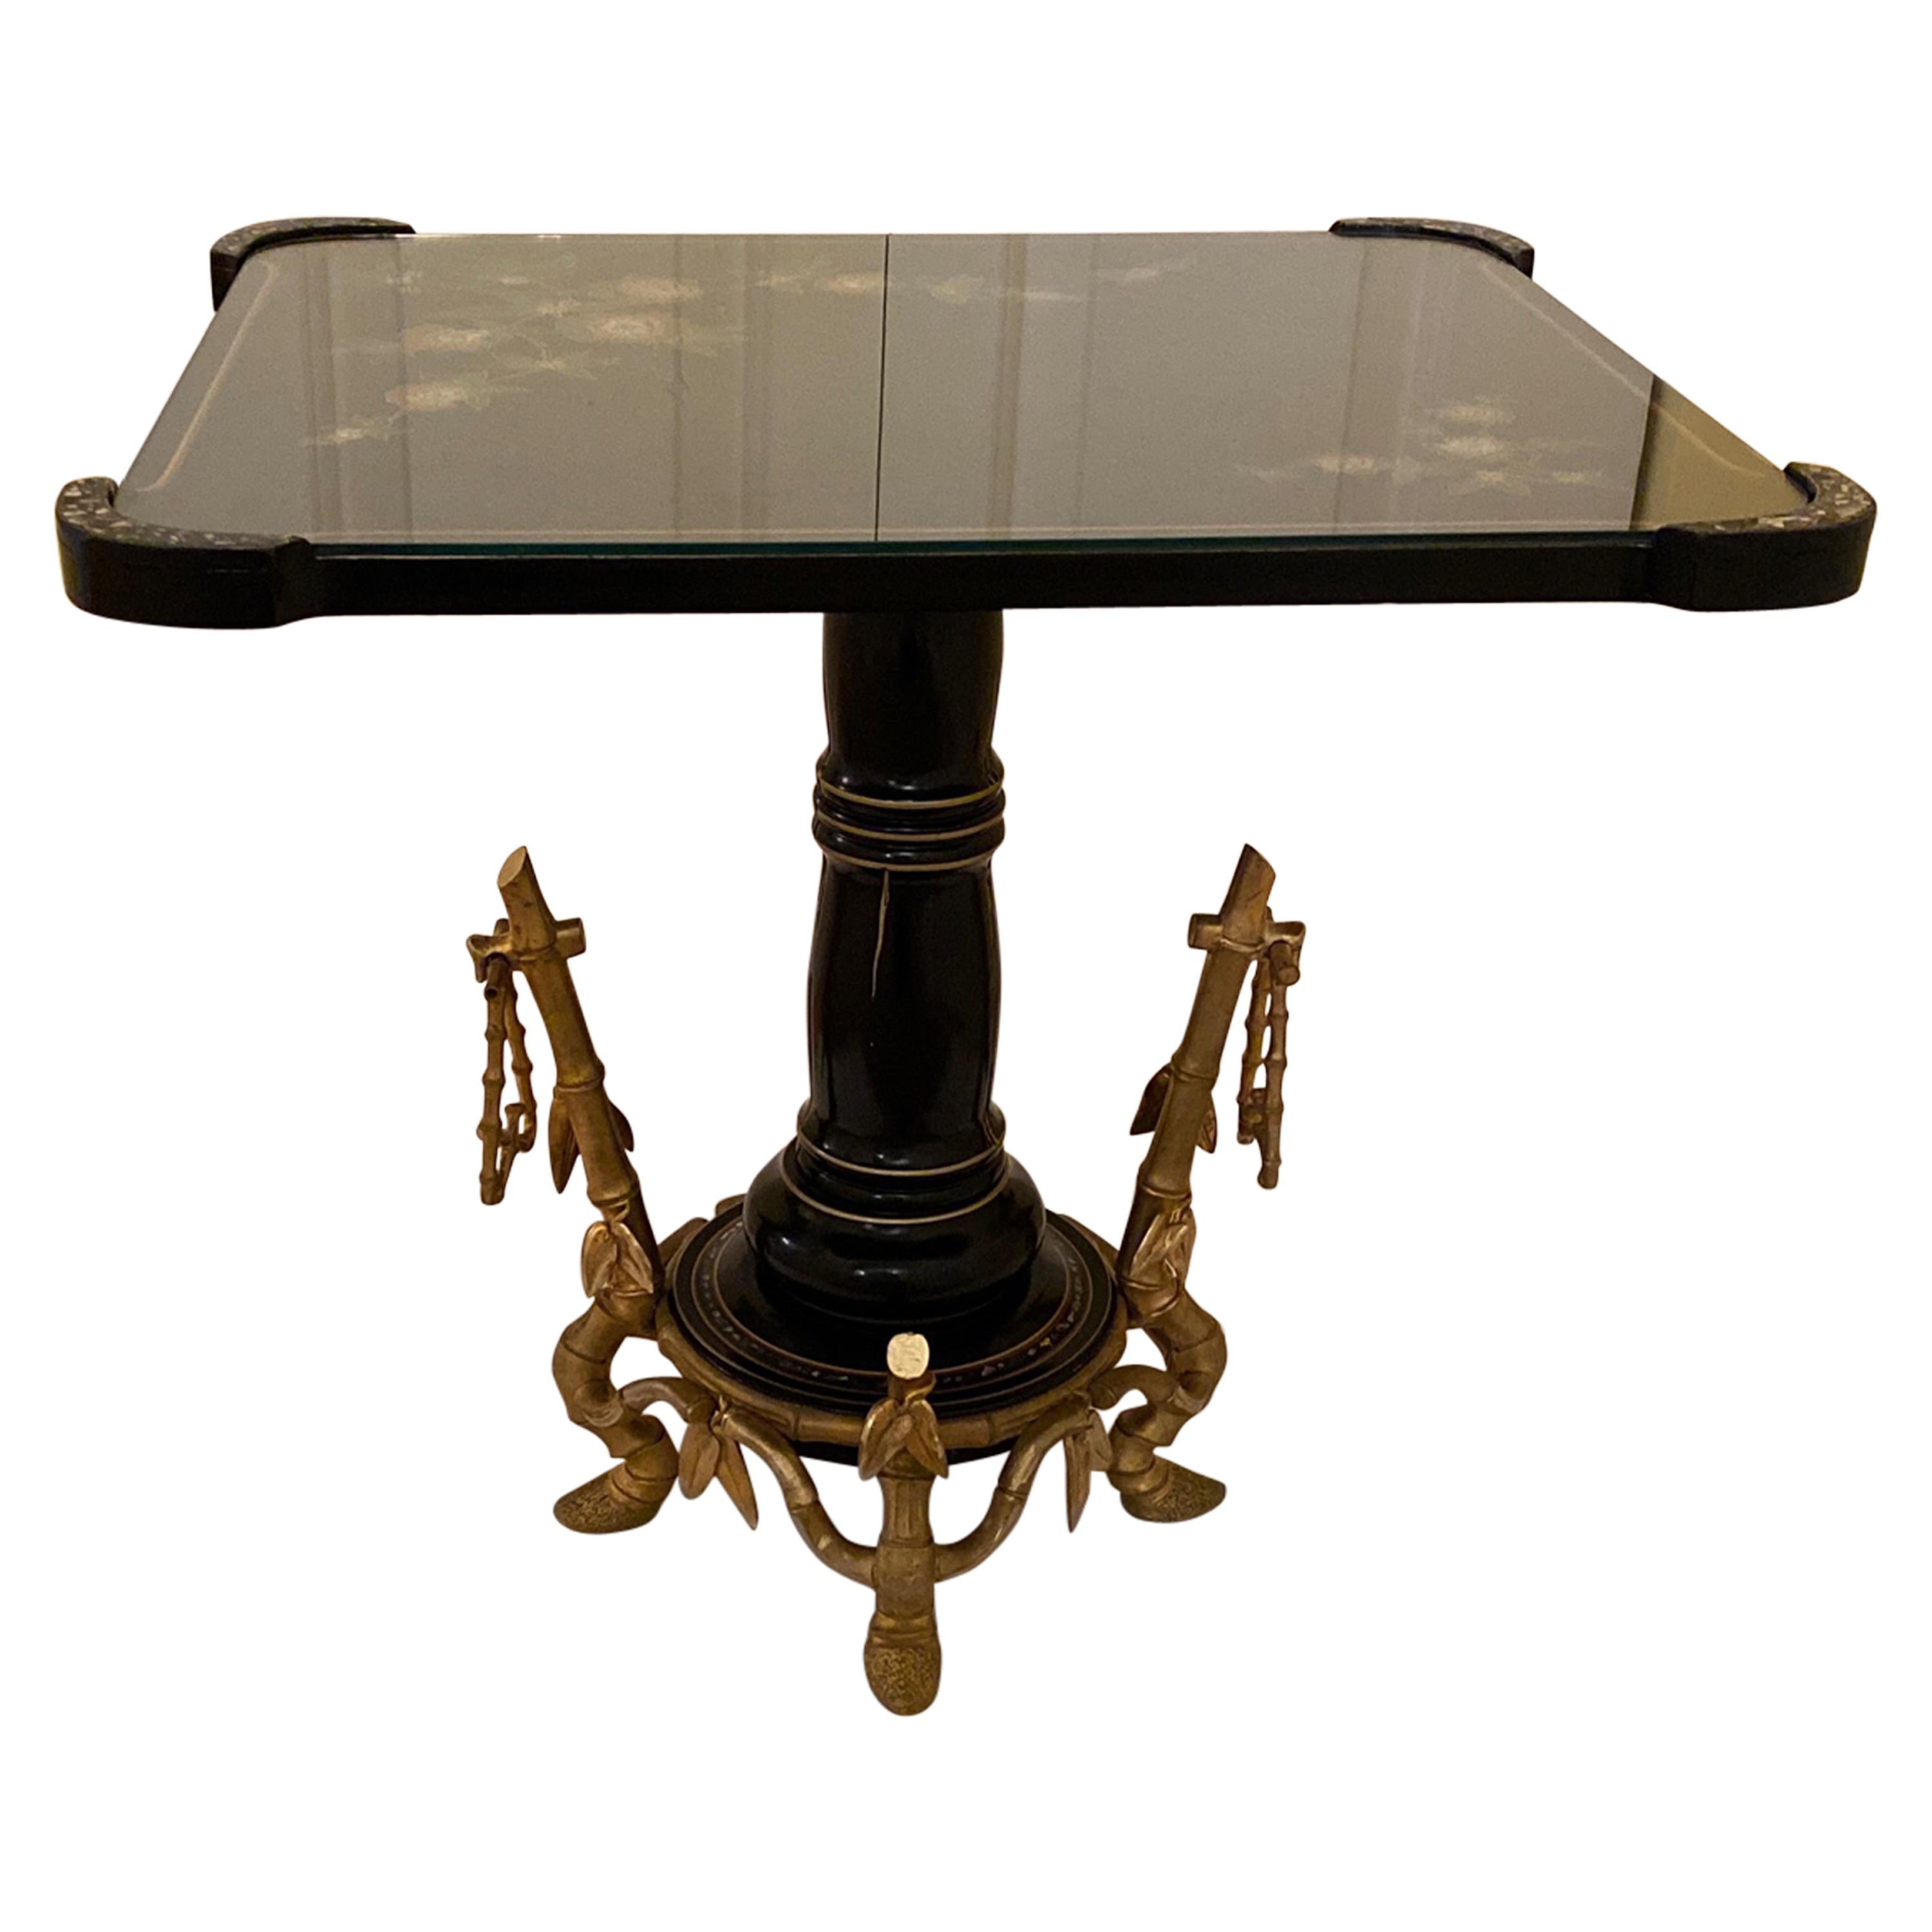 French Low Table with Aesthetic Movement Ormolu Base by Maison Giroux 1870's